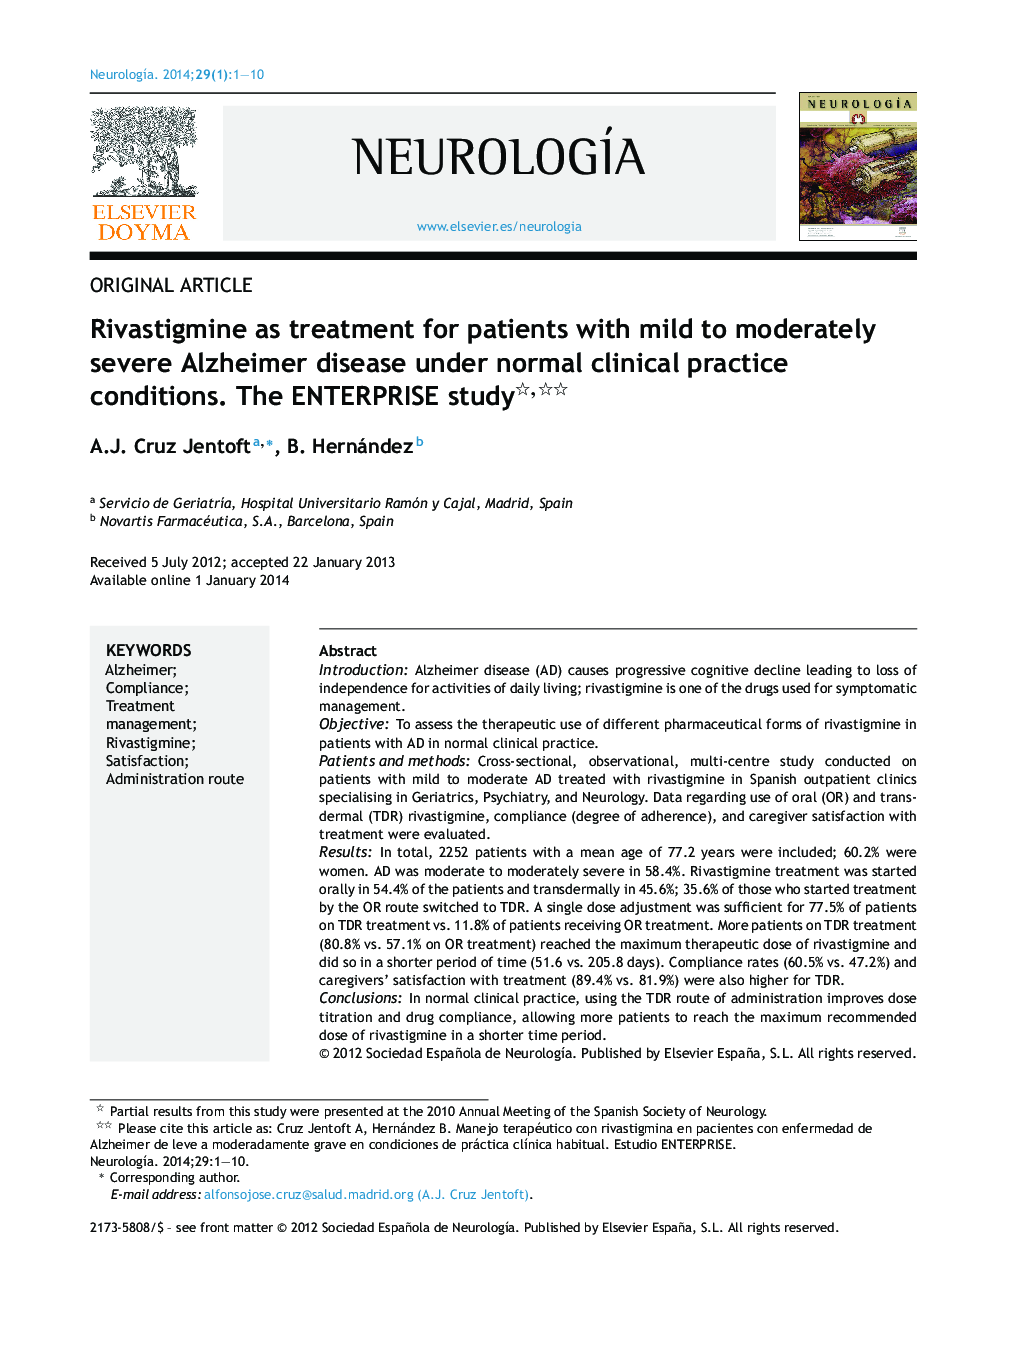 Rivastigmine as treatment for patients with mild to moderately severe Alzheimer disease under normal clinical practice conditions. The ENTERPRISE study 